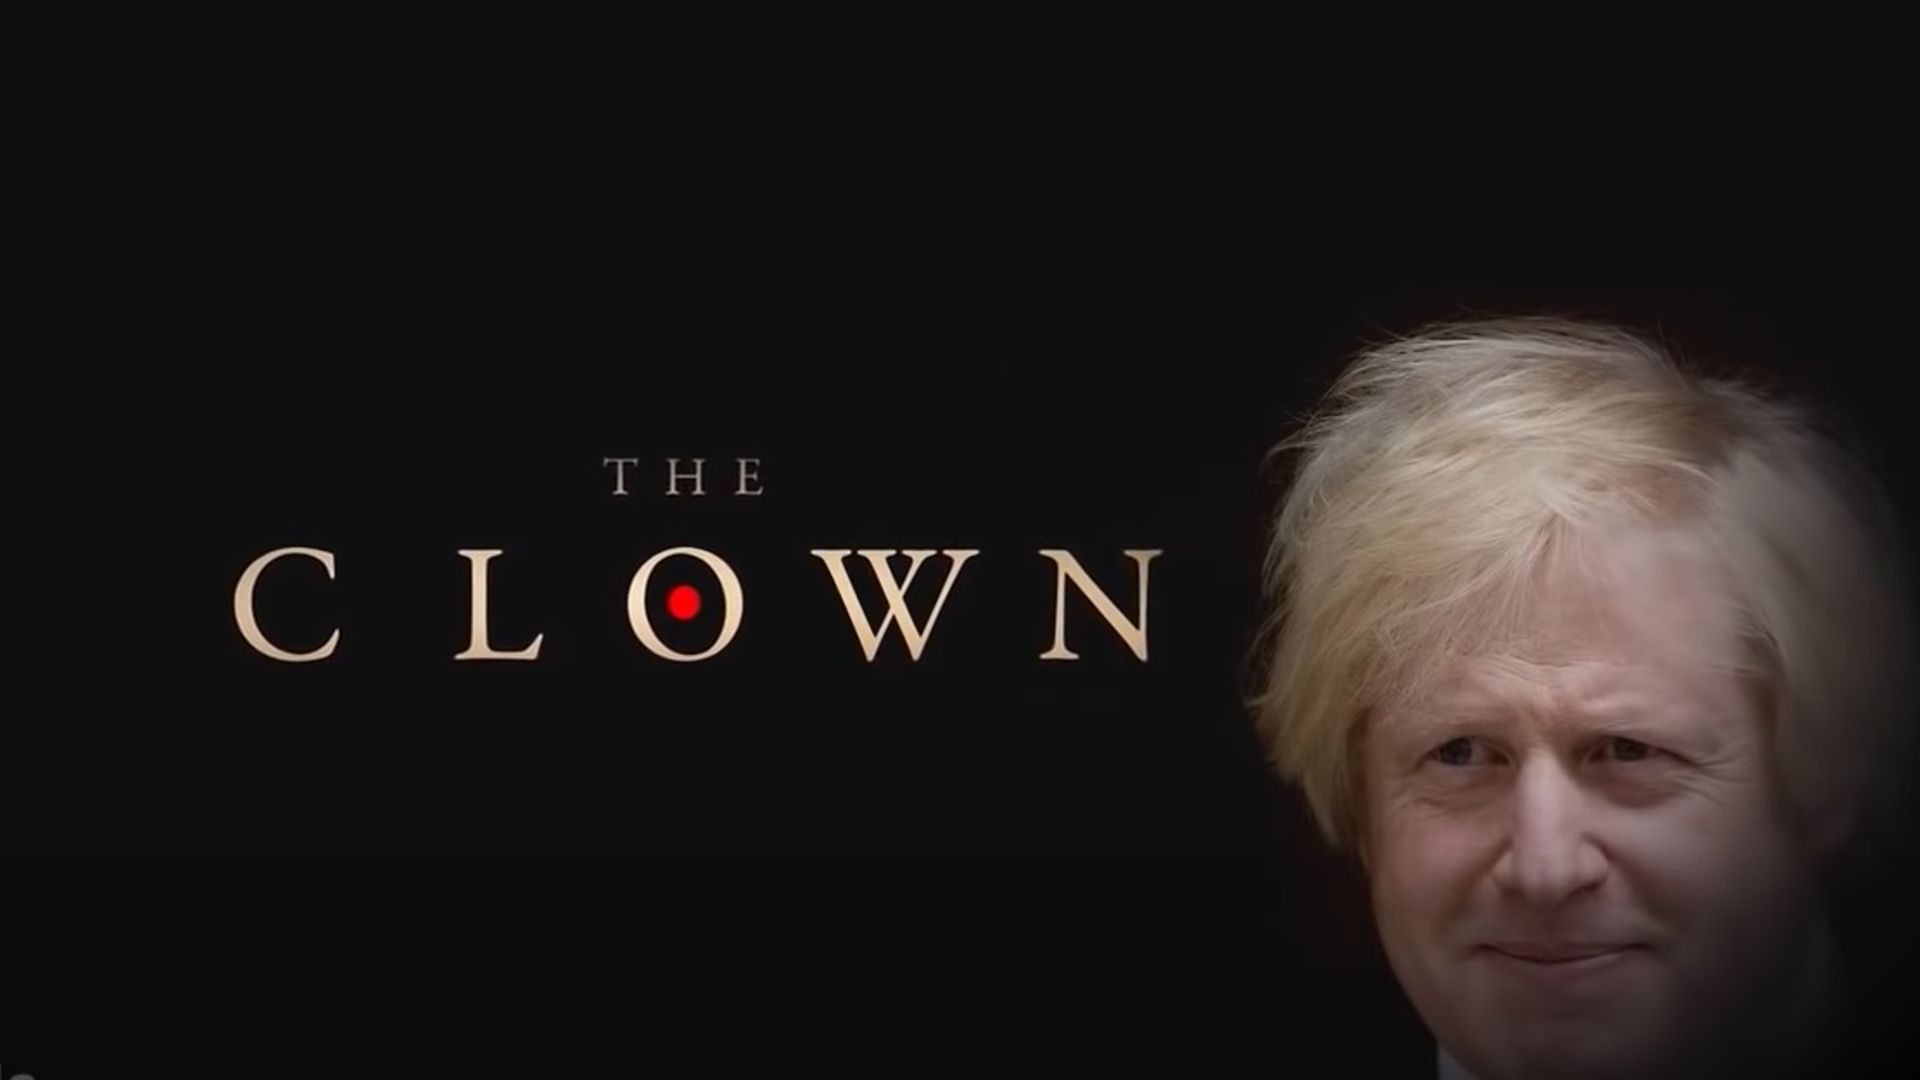 German comedians have satirised 'The Crown' with a version about Boris Johnson and Brexit. - Credit: YouTube